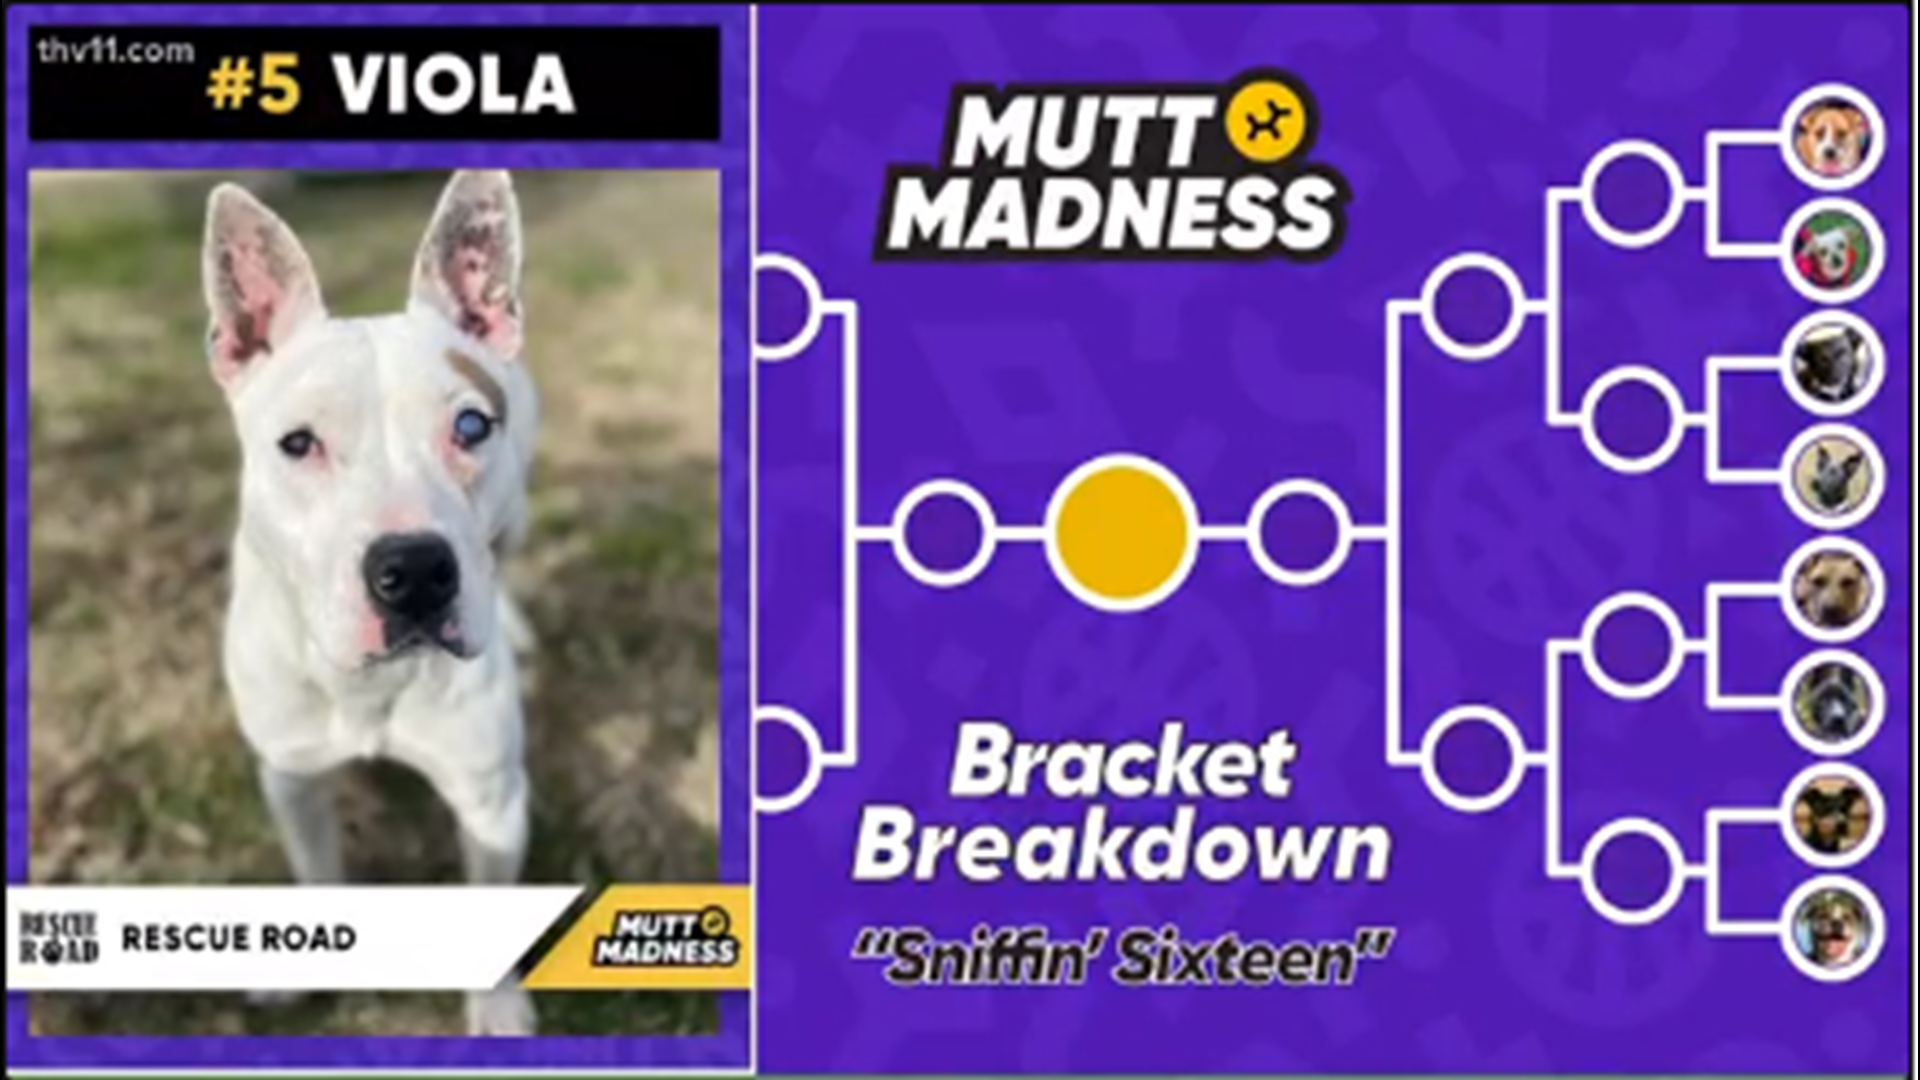 Viola is representing Rescue Road and competing with 15 other rescue organizations to win a $5,000 donation. Vote: http://bit.ly/RRMuttMadness